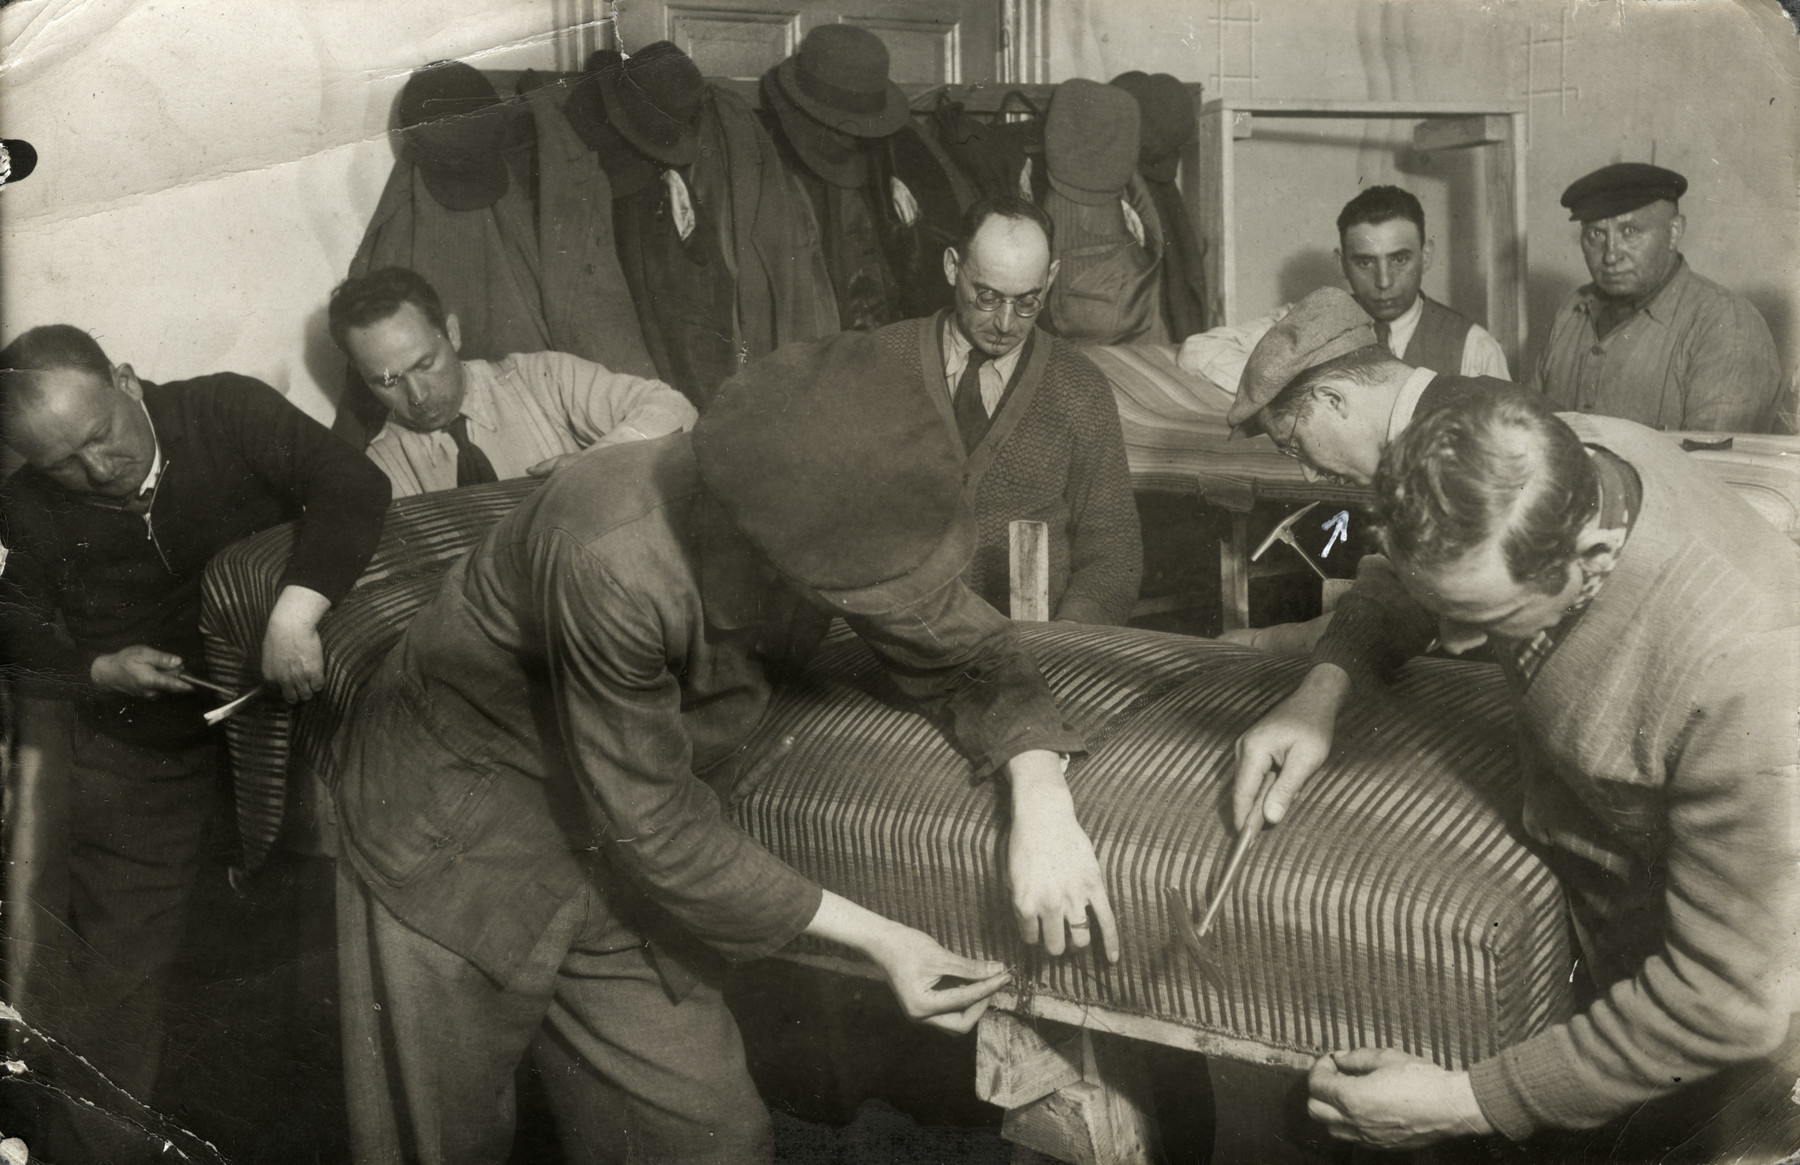 German Jews exiled to Zbaszyn reupholster furniture in a workshop.

Yehoshua Birnbaum is on the middle left with a cap and glasses.